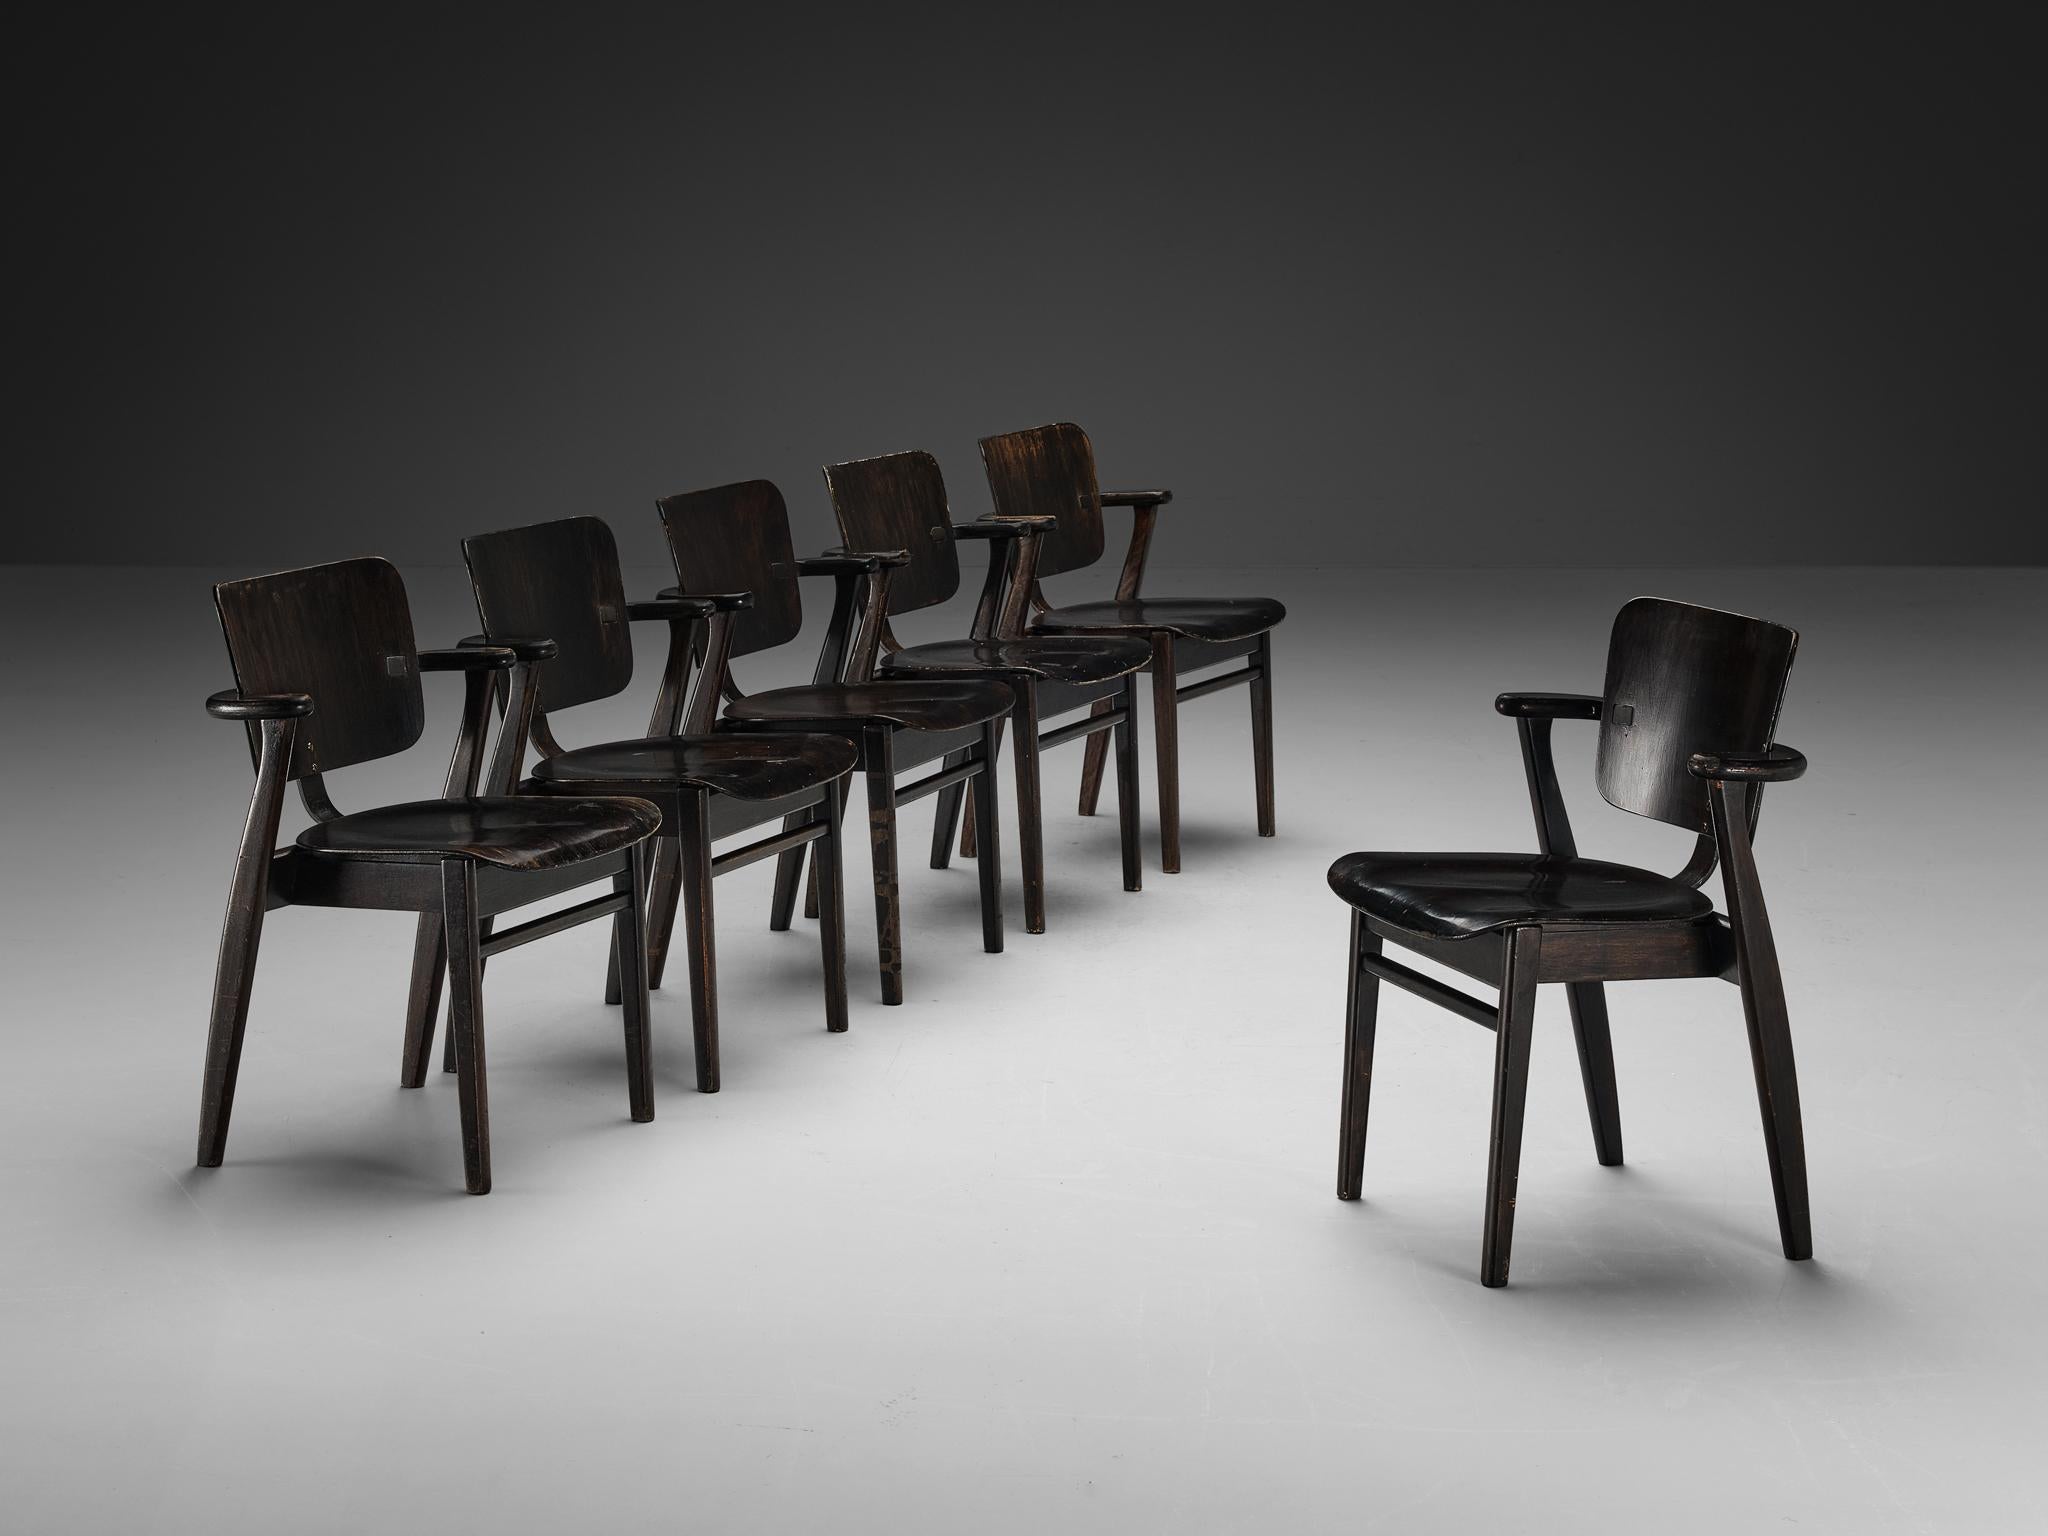 Ilmari Tapiovaara, set of six armchairs, stained teak, metal, Finland, 1953

This is a wonderful set of early ‘Domus’ armchairs by Finnish designer Ilmari Tapiovaara. Executed in a black color, the framework includes laminated teak plywood. This